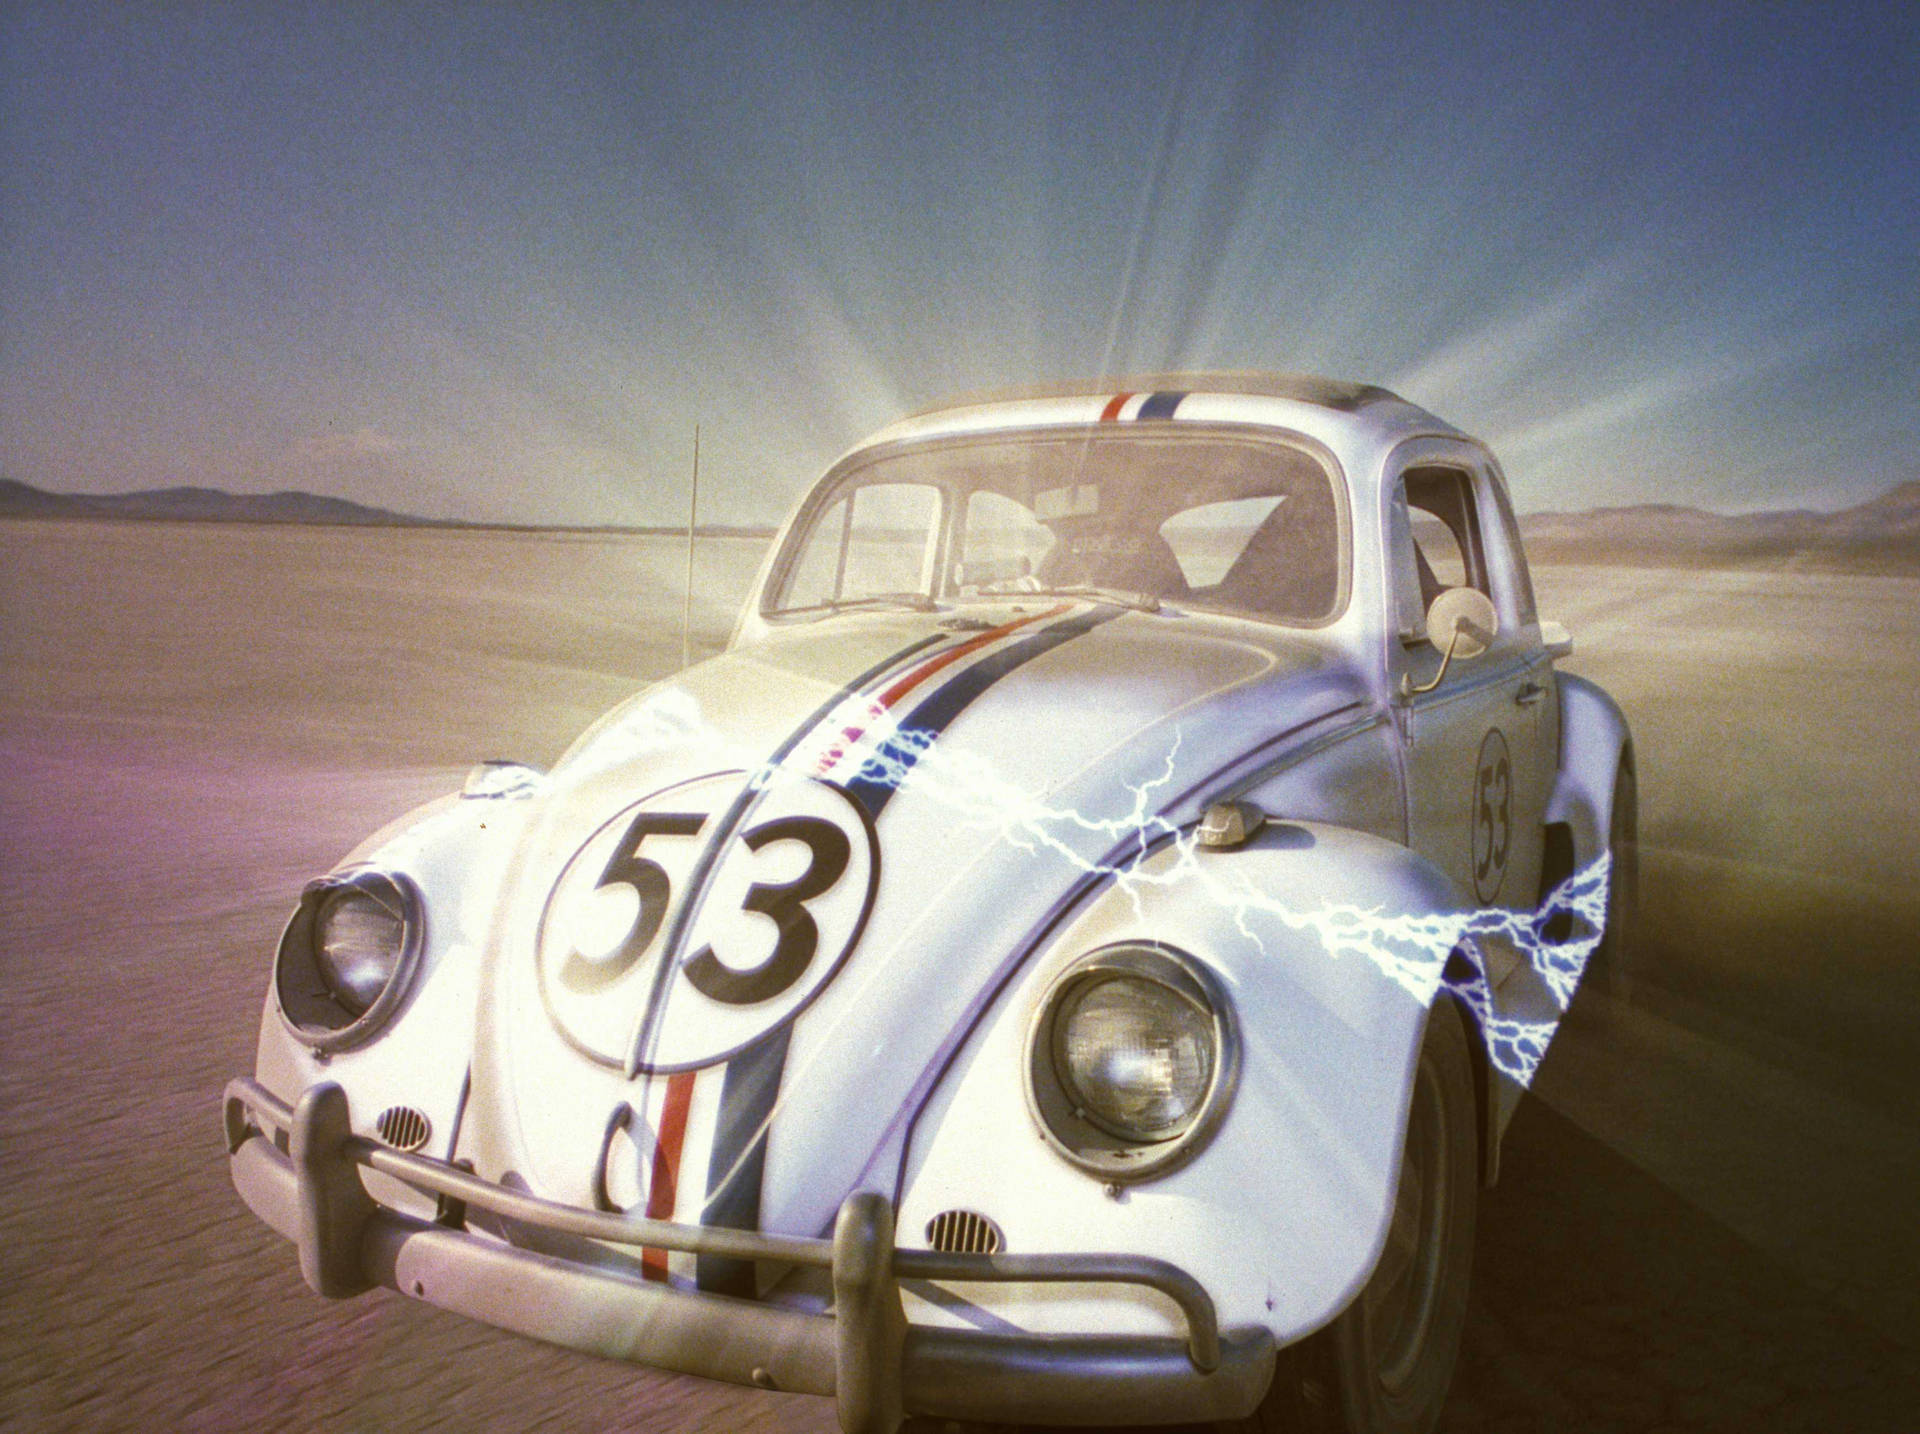 Herbie Fully Loaded Glowing In The Desert Background